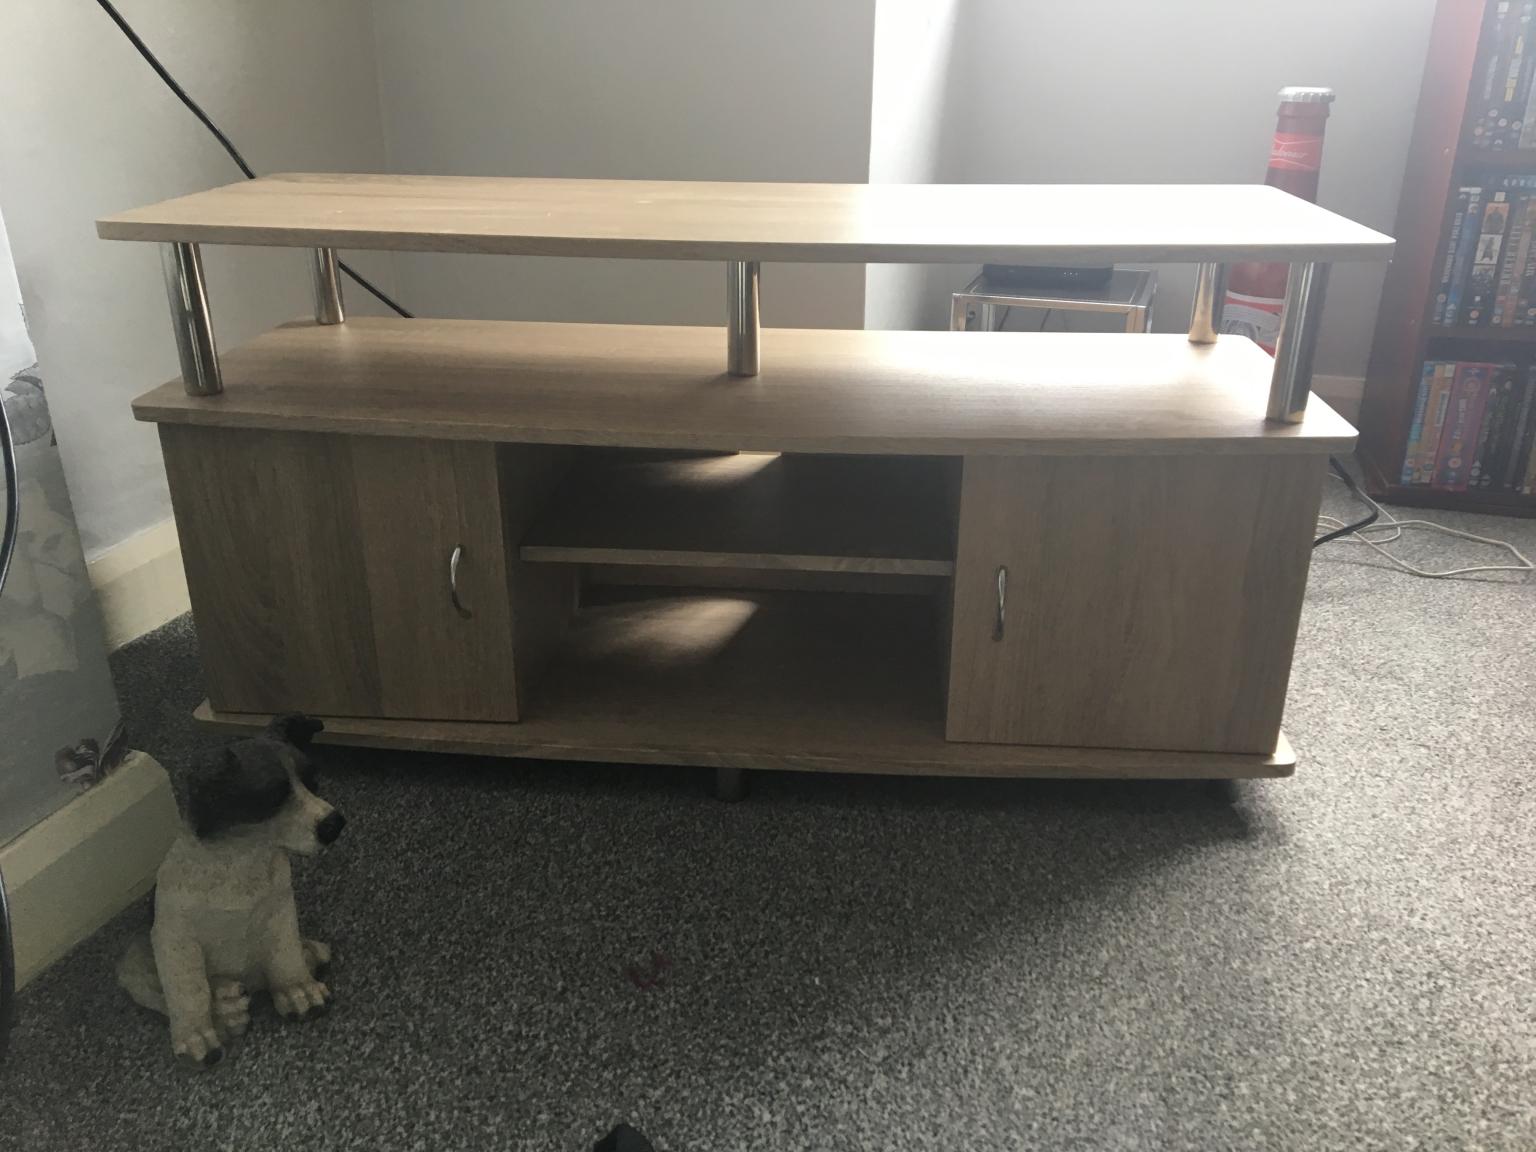 Tv Cabinet In Ts11 Sea For 35 00 For Sale Shpock